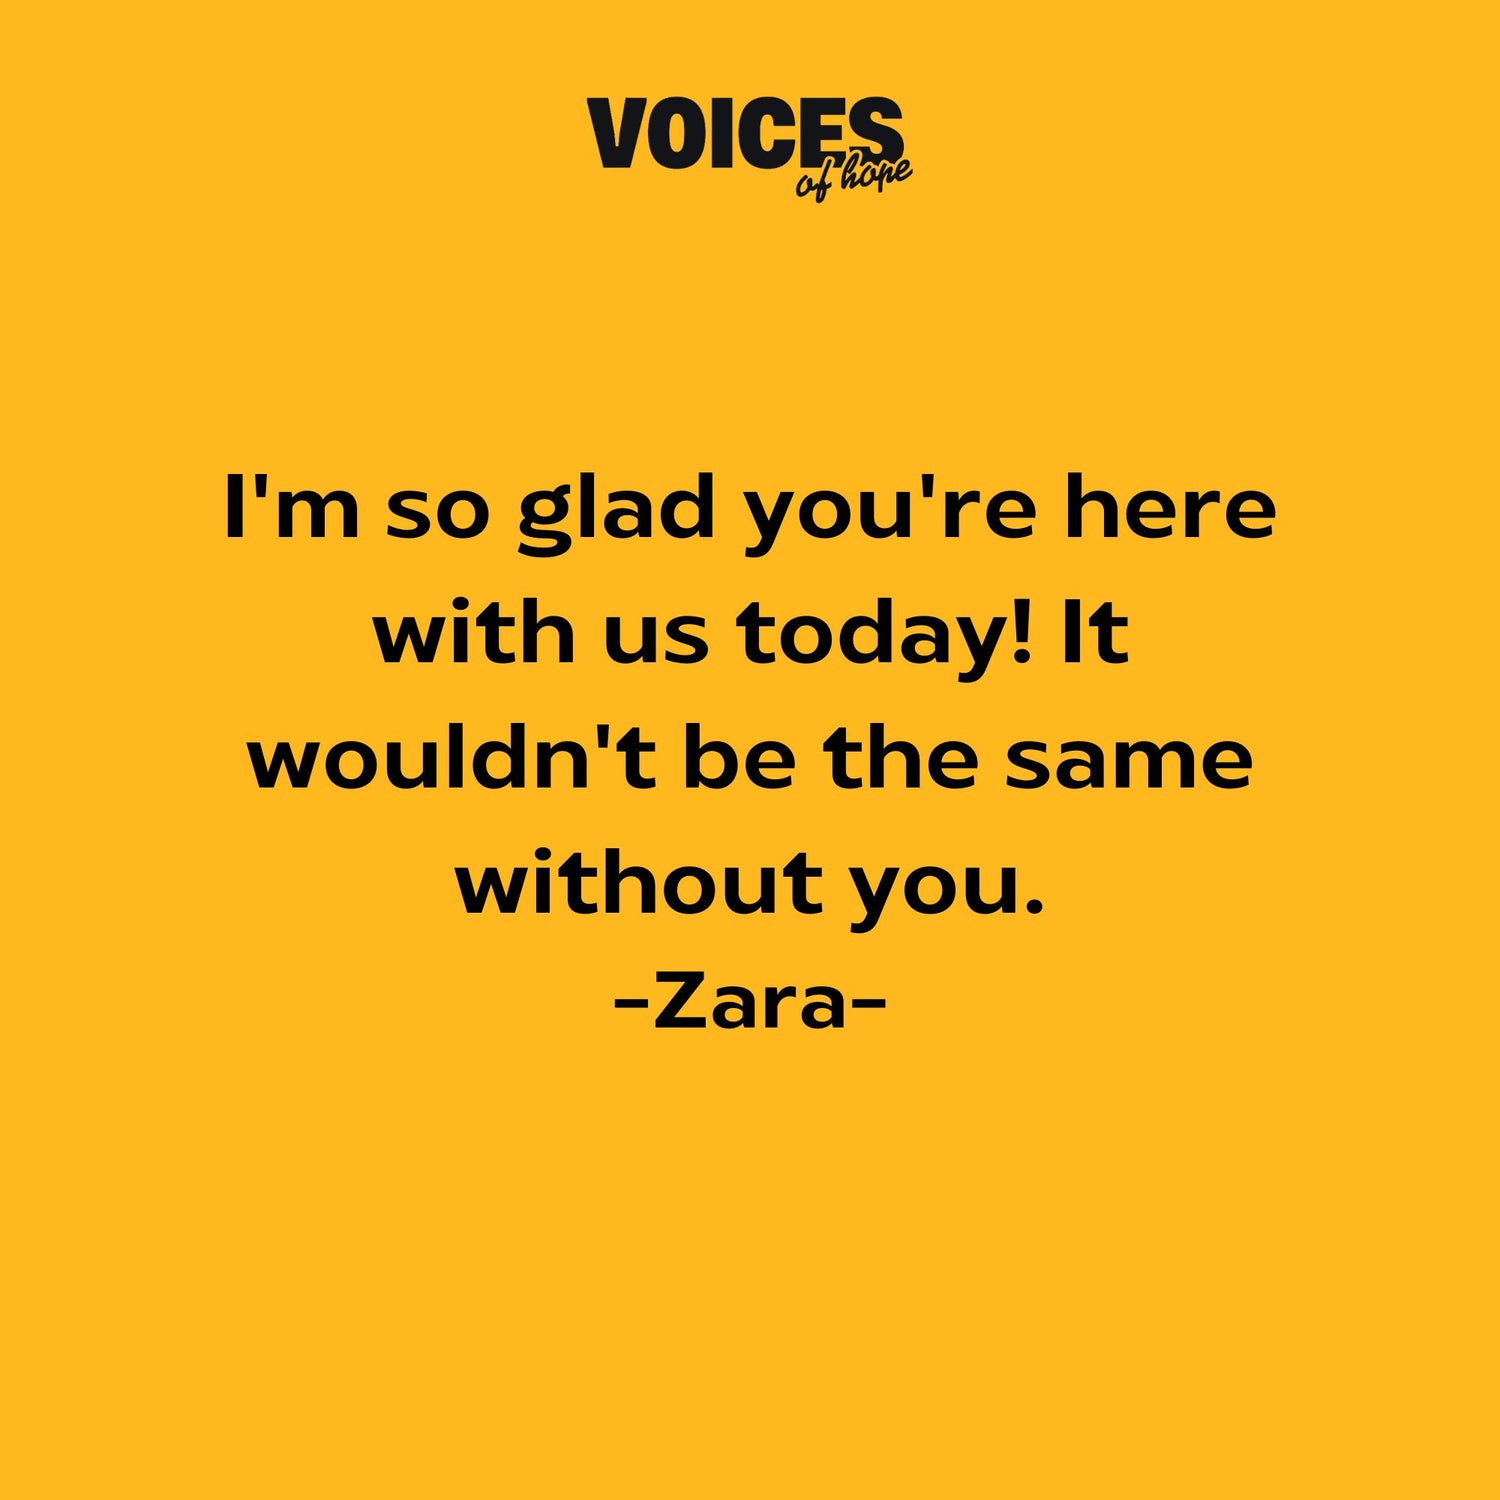 Yellow background with black writing that reads: "I'm so glad you're here with us today! It wouldn't be the same without you. Zara."